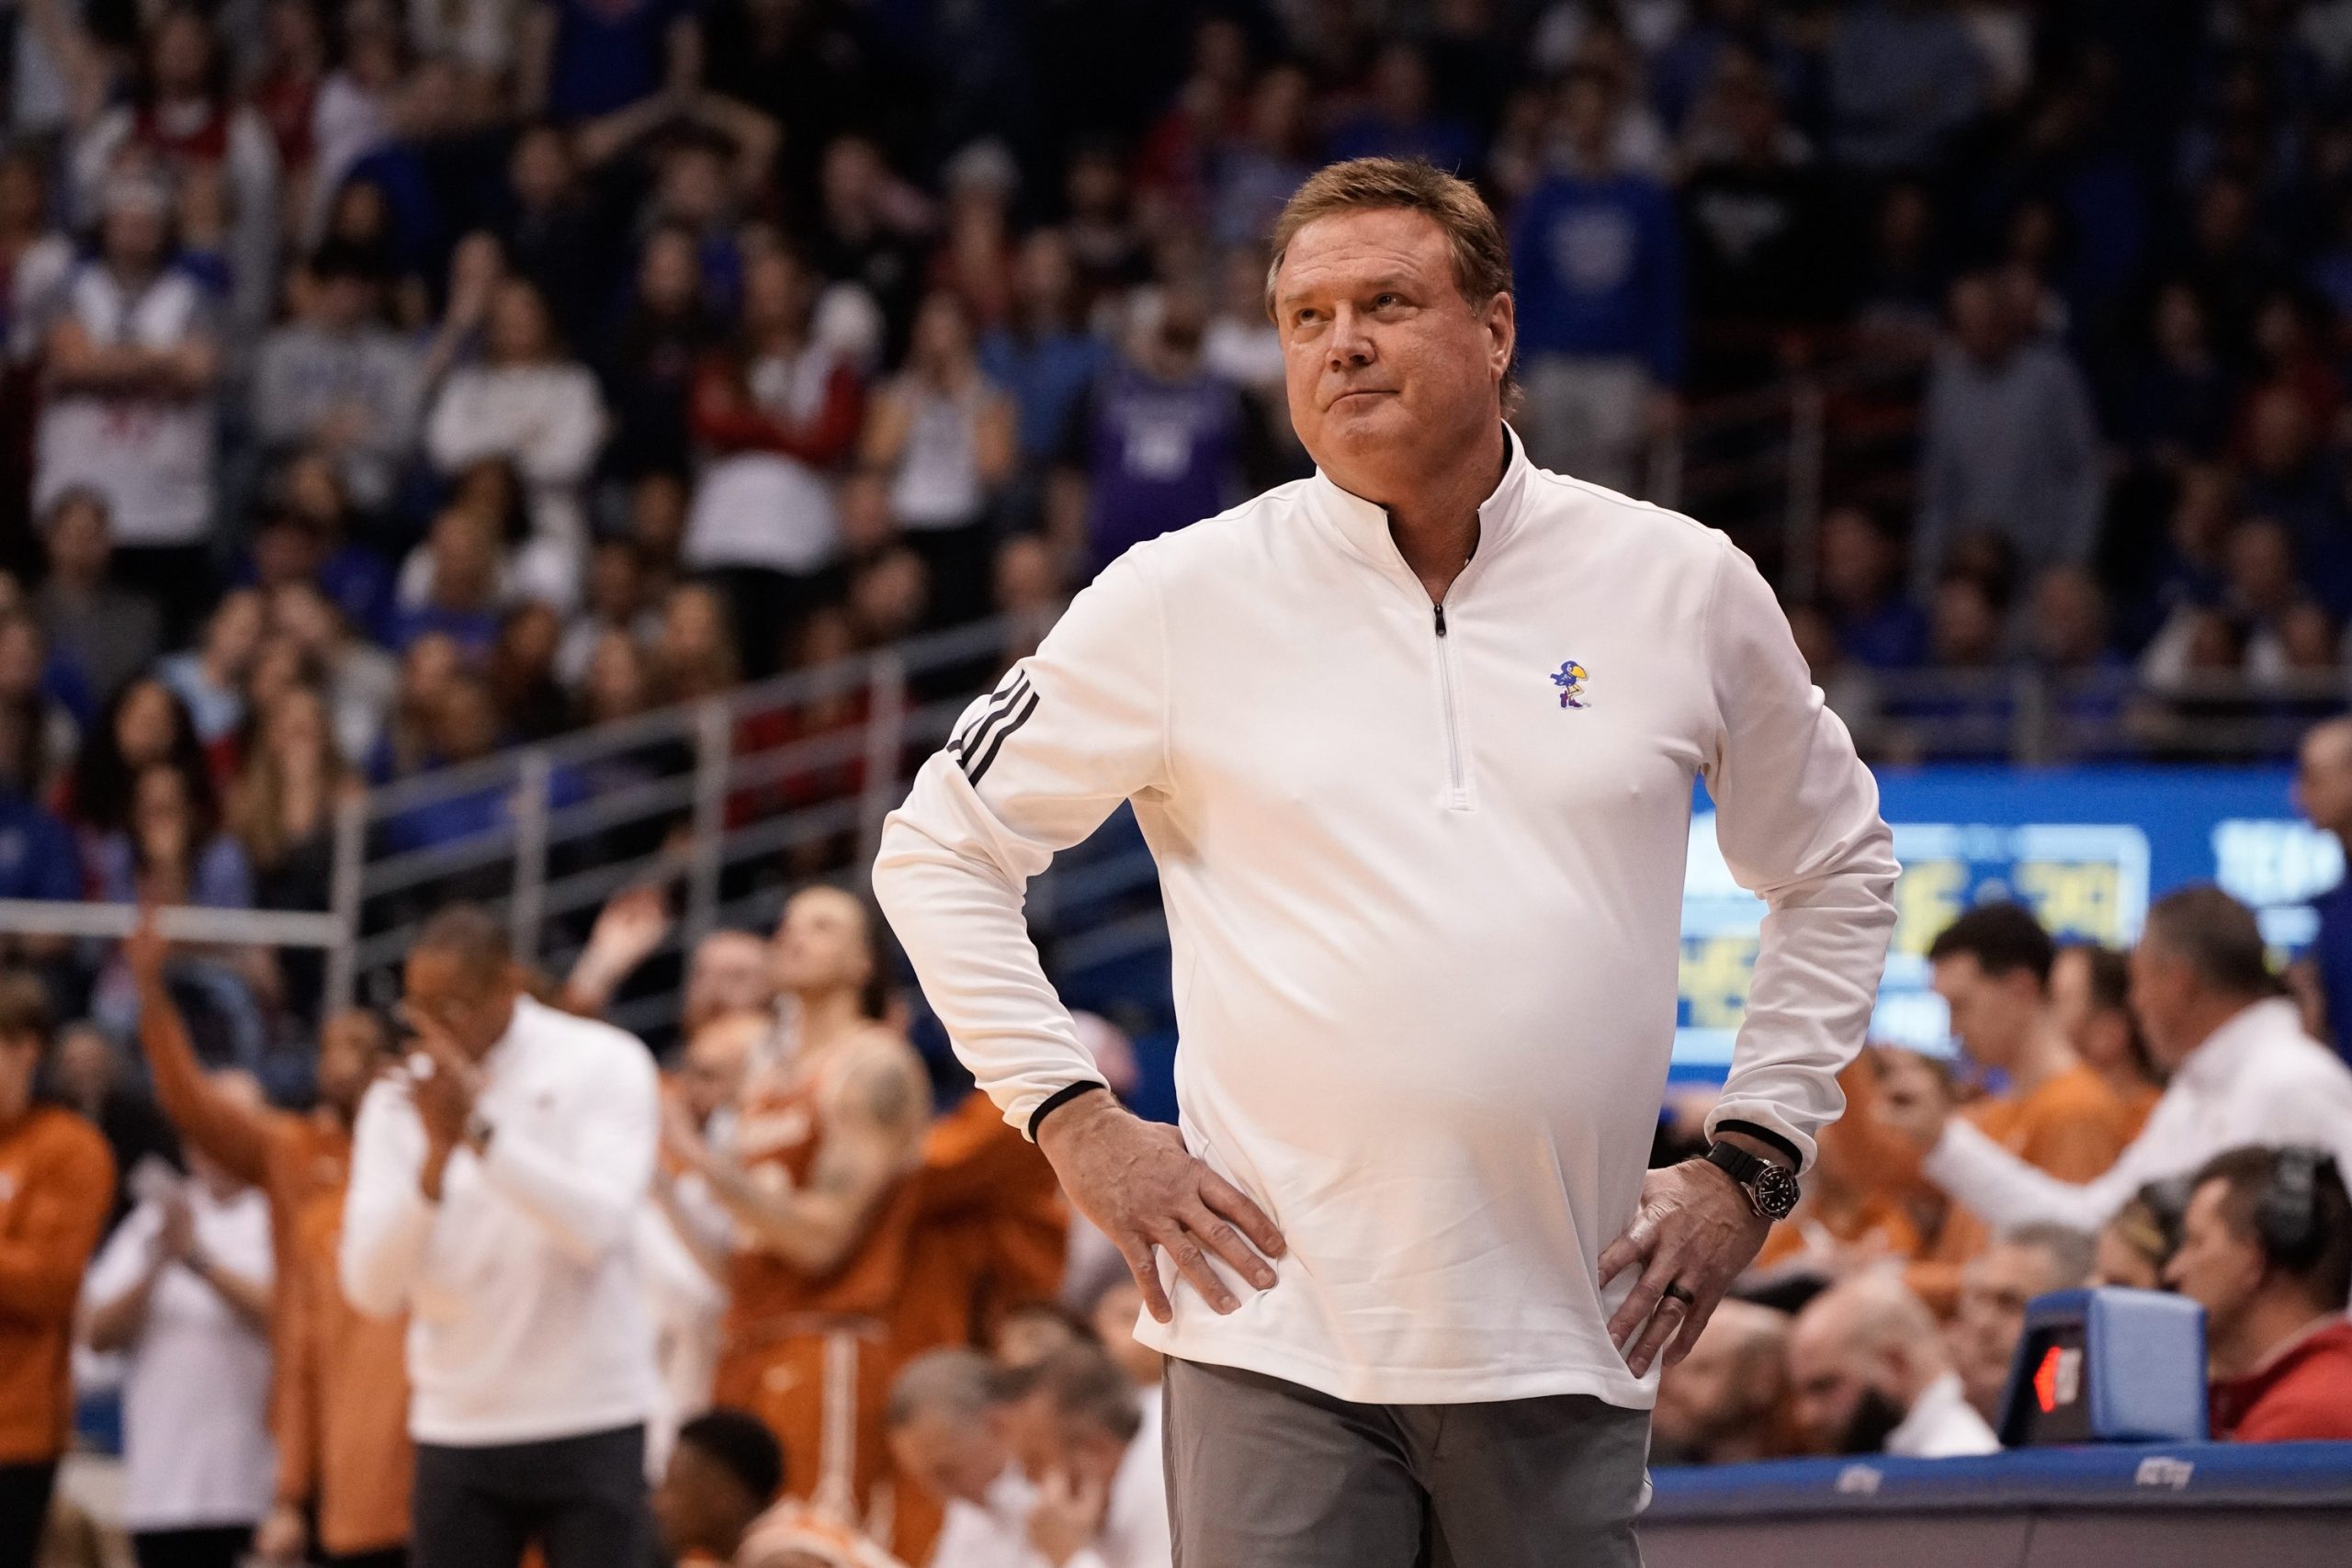 Kansas Basketball coach Bill Self reacts to a call in the second half of his team's game against Texas at Allen Fieldhouse.